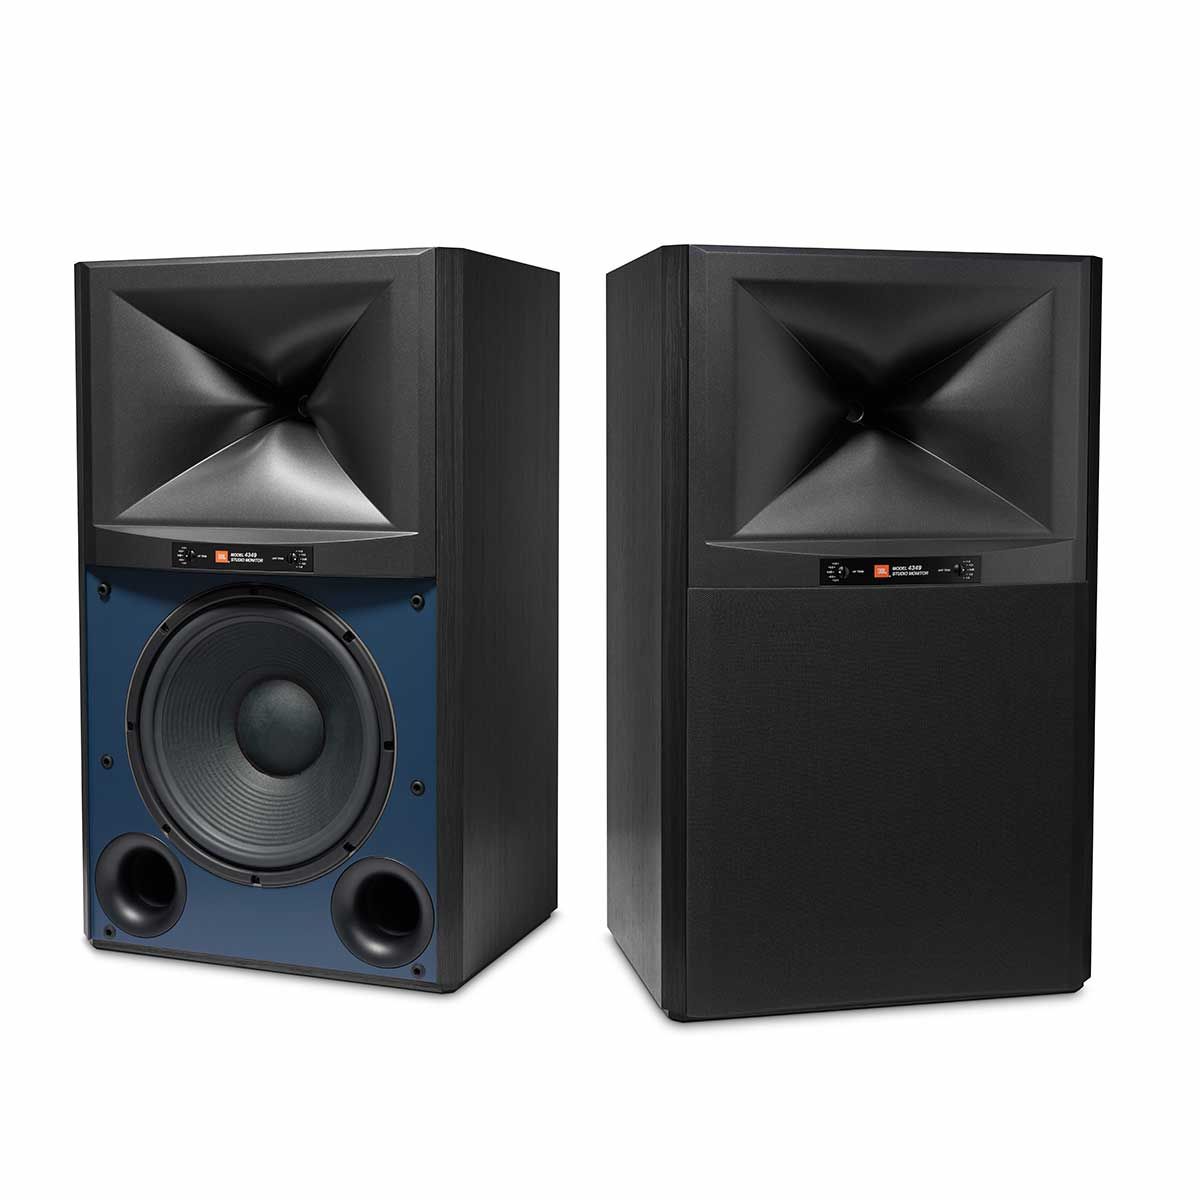 JBL Synthesis 4349 2-Way Studio Monitor, Black, set of two, one with grille and one without grille